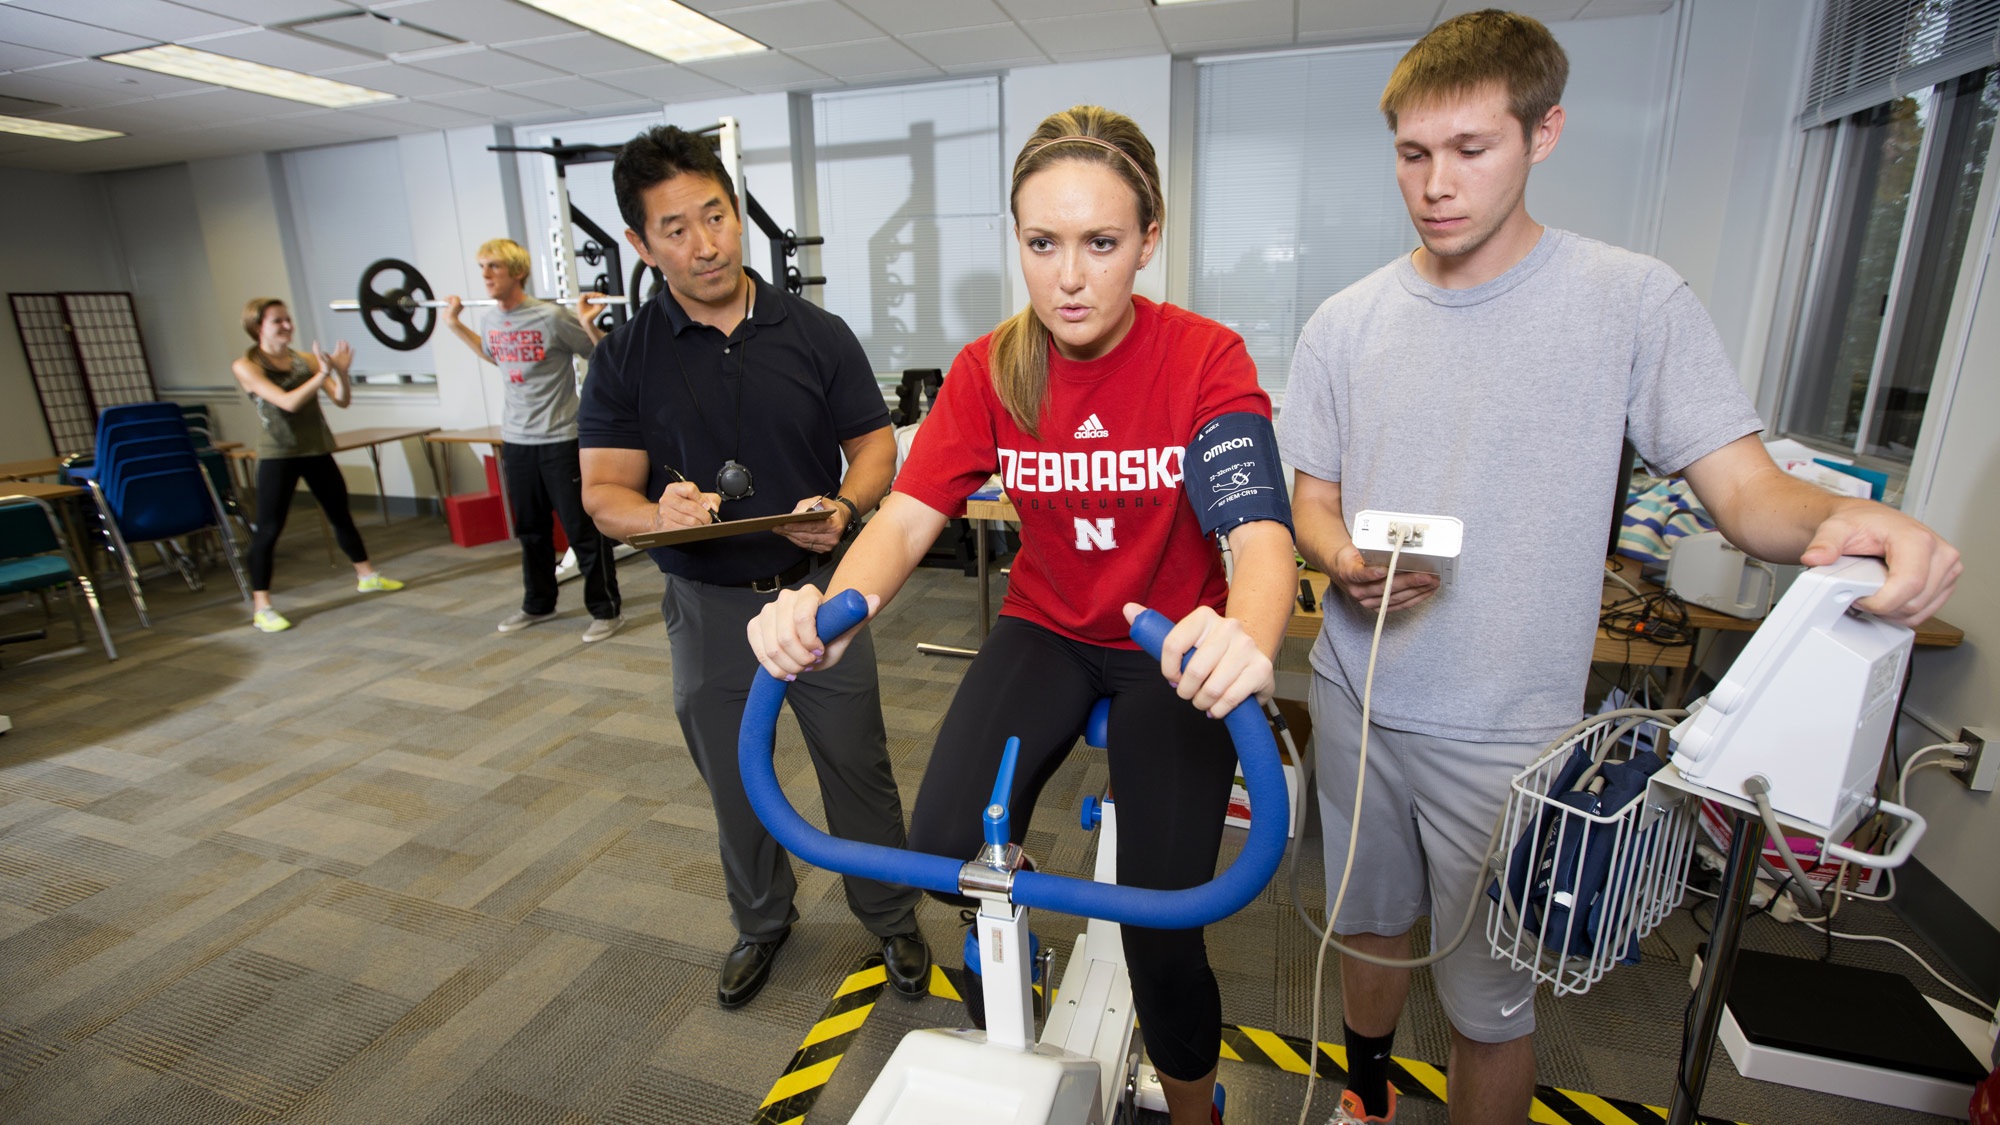 Student and coaches testing performance on an exercise bike.